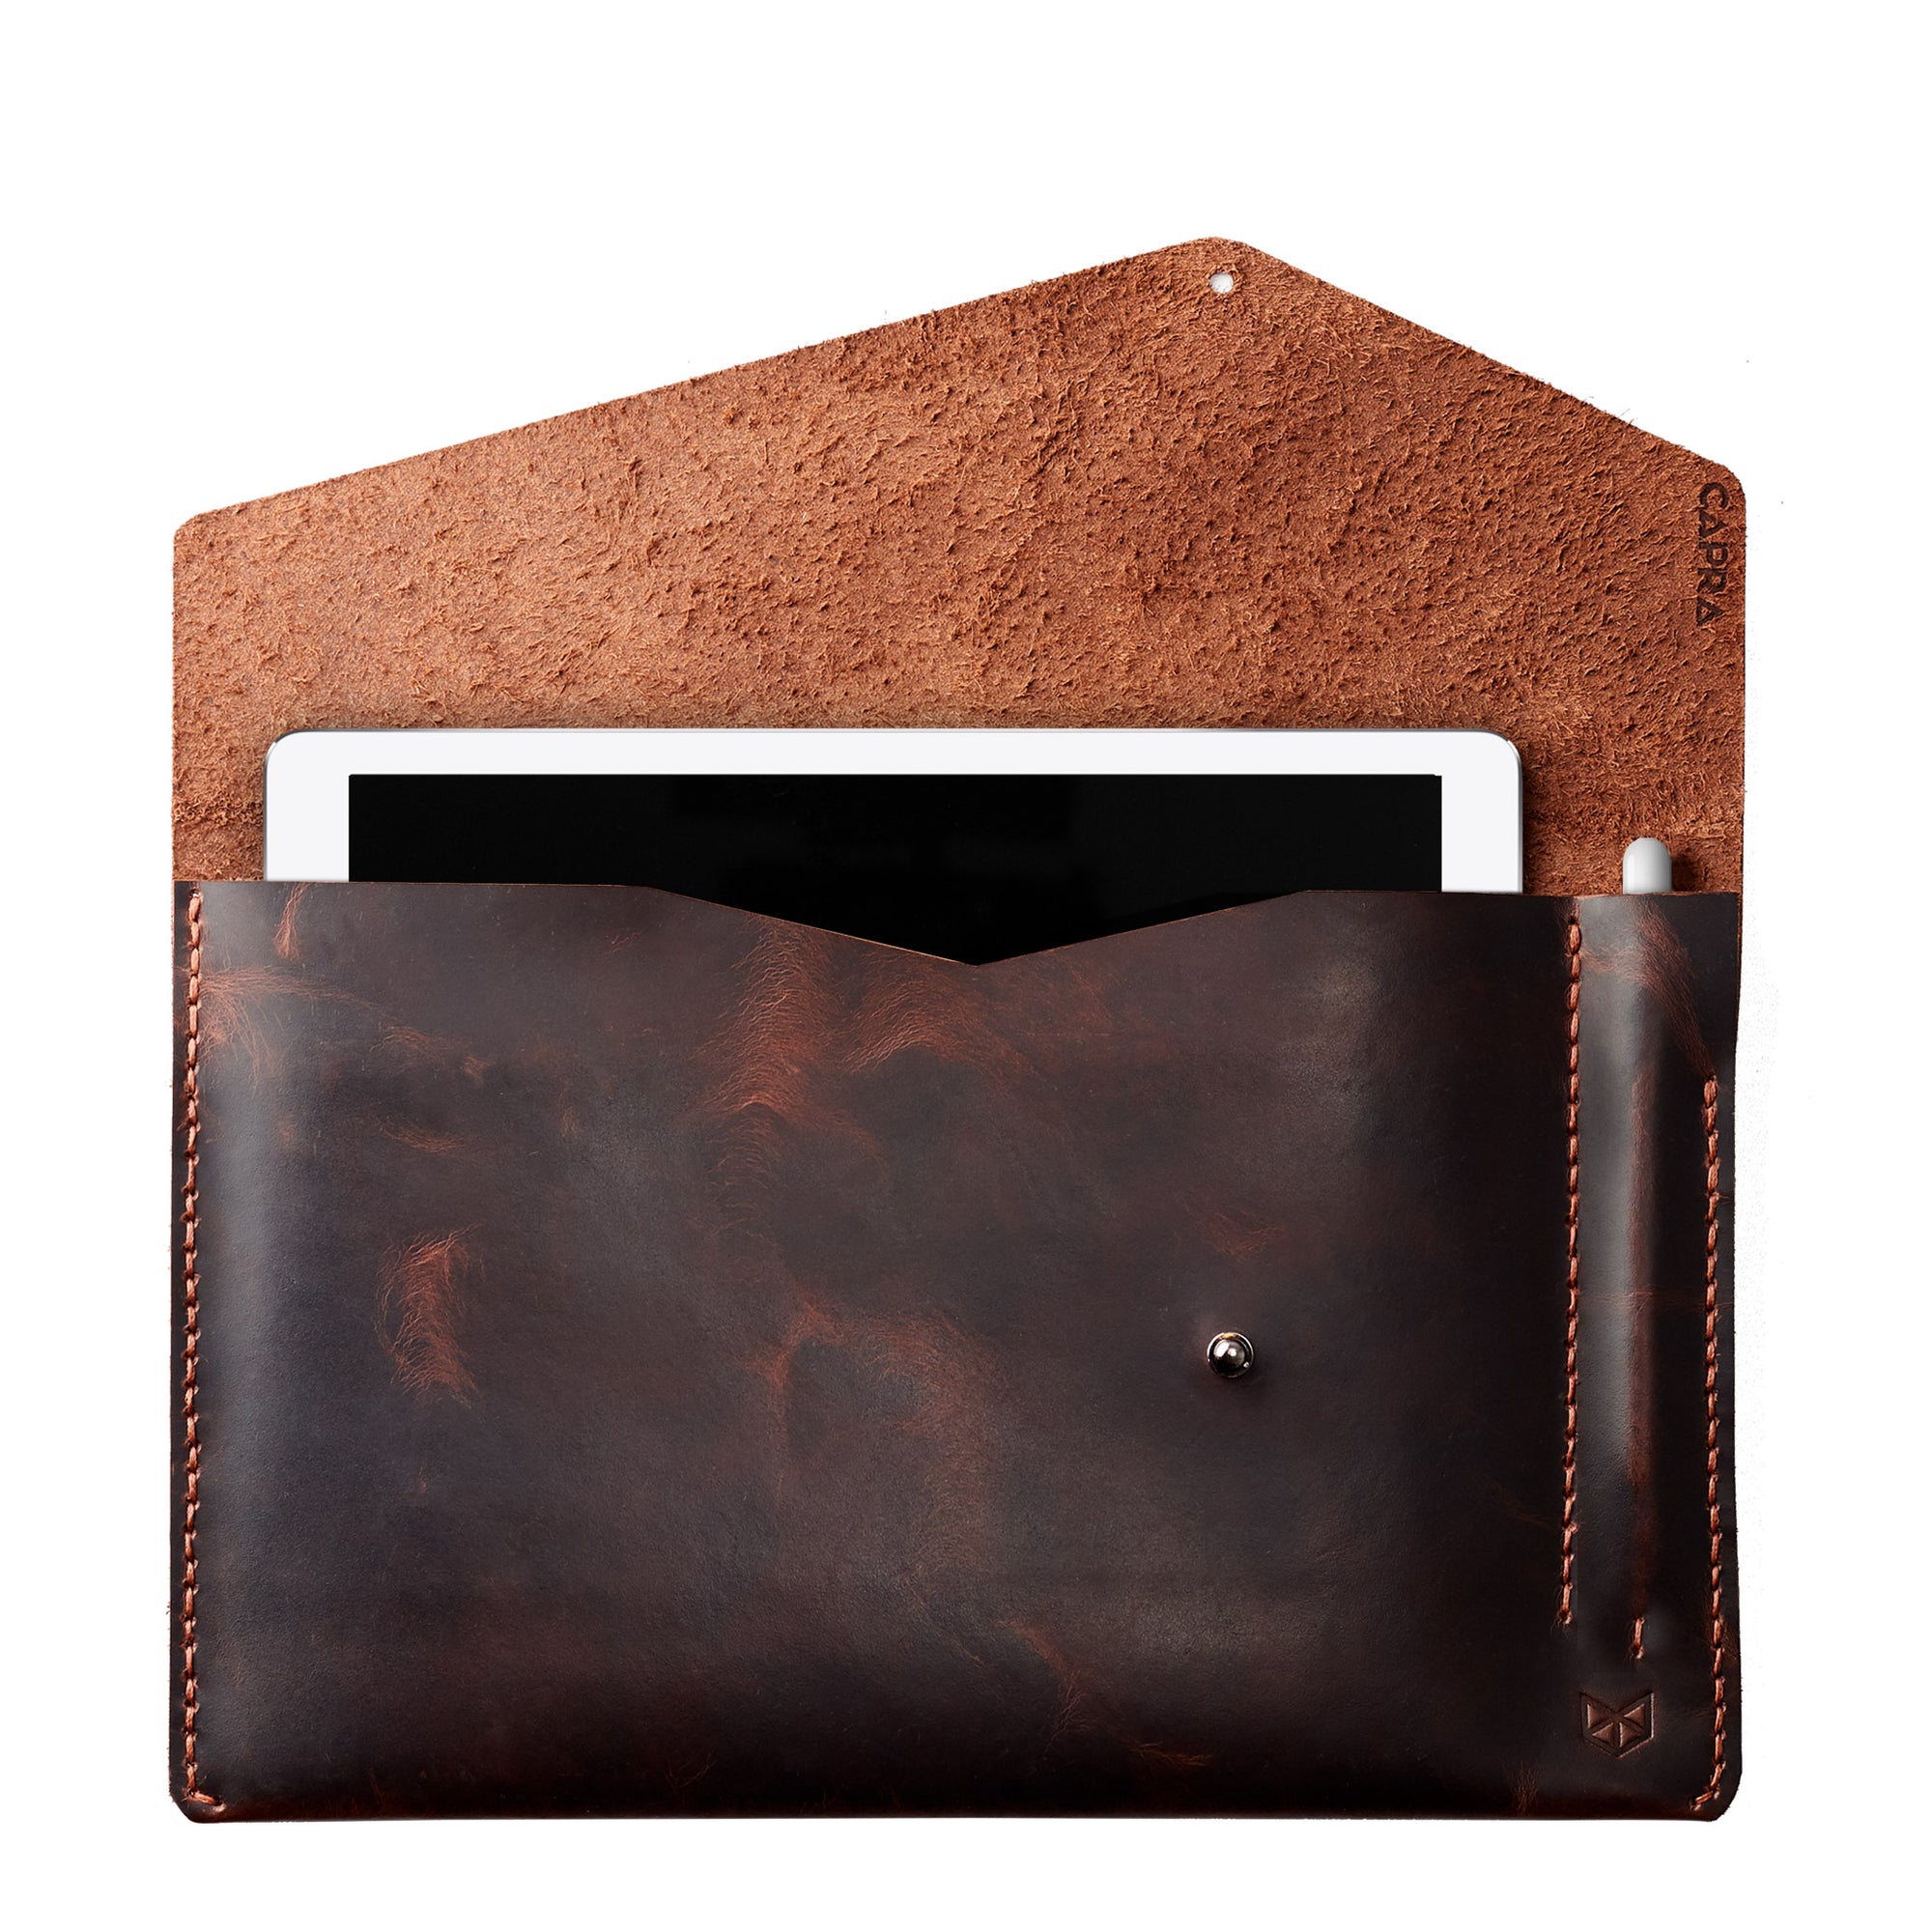 Red brown leather sleeve for Pixel Slate. Mens gifts